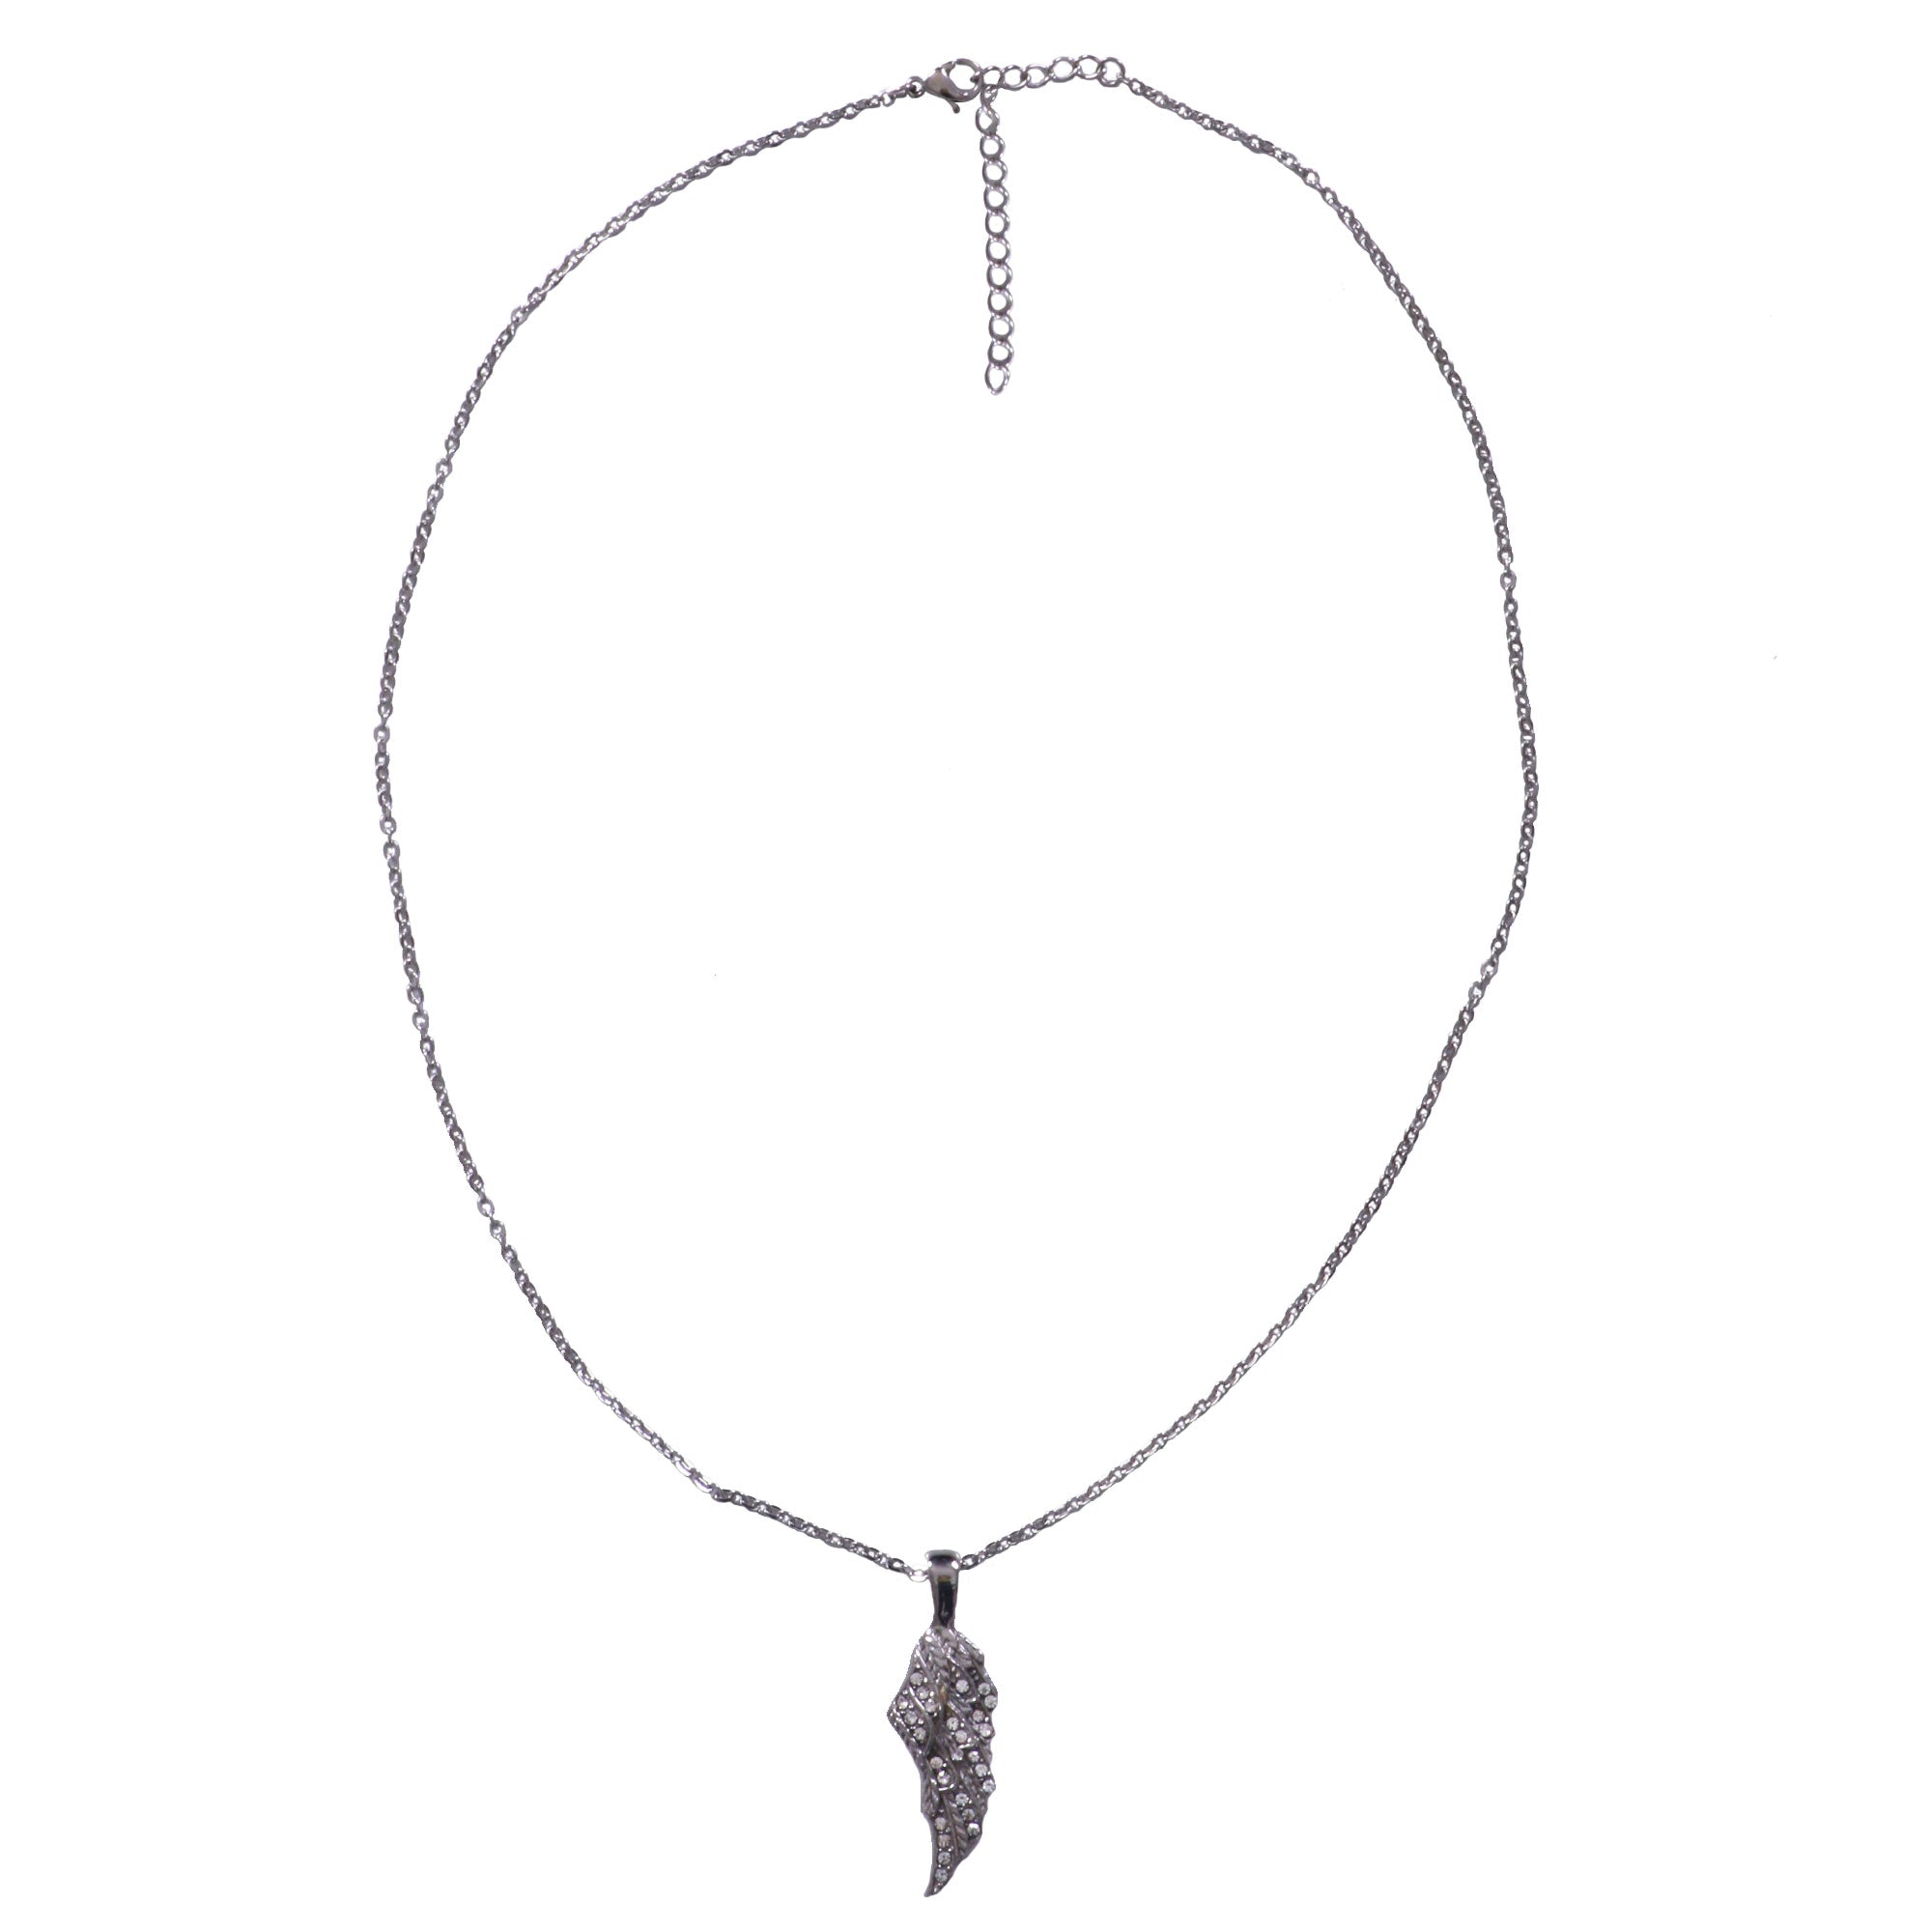 Hot Leathers JWN1001 One Side Angel Wing Necklace